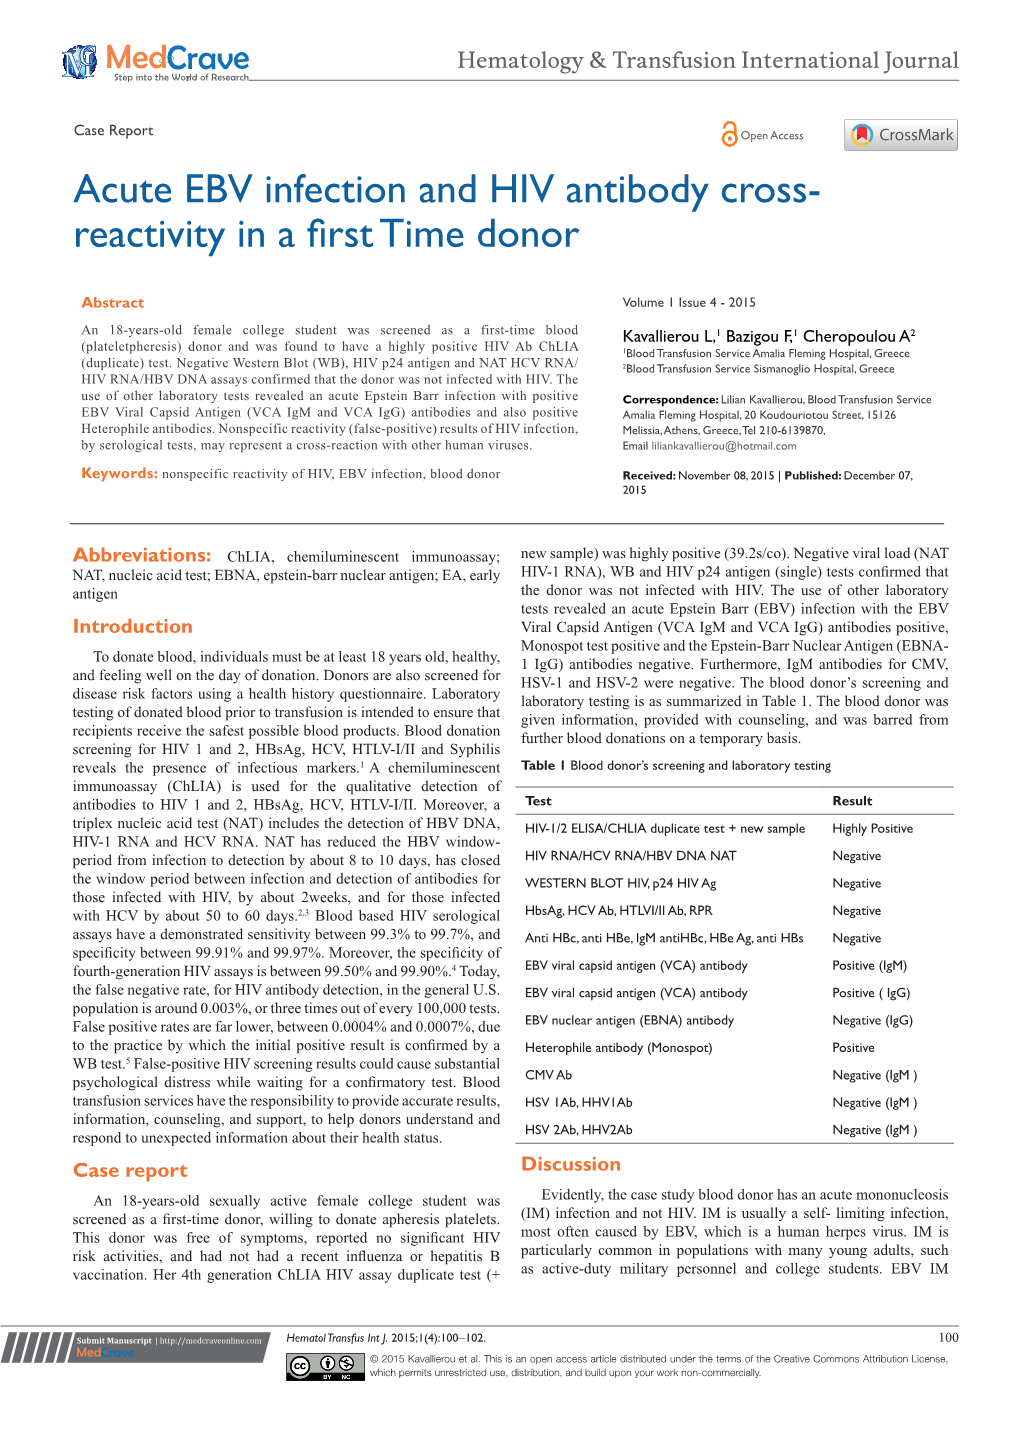 Acute EBV Infection and HIV Antibody Cross-Reactivity in a First Time Donor ©2015 Kavallierou Et Al